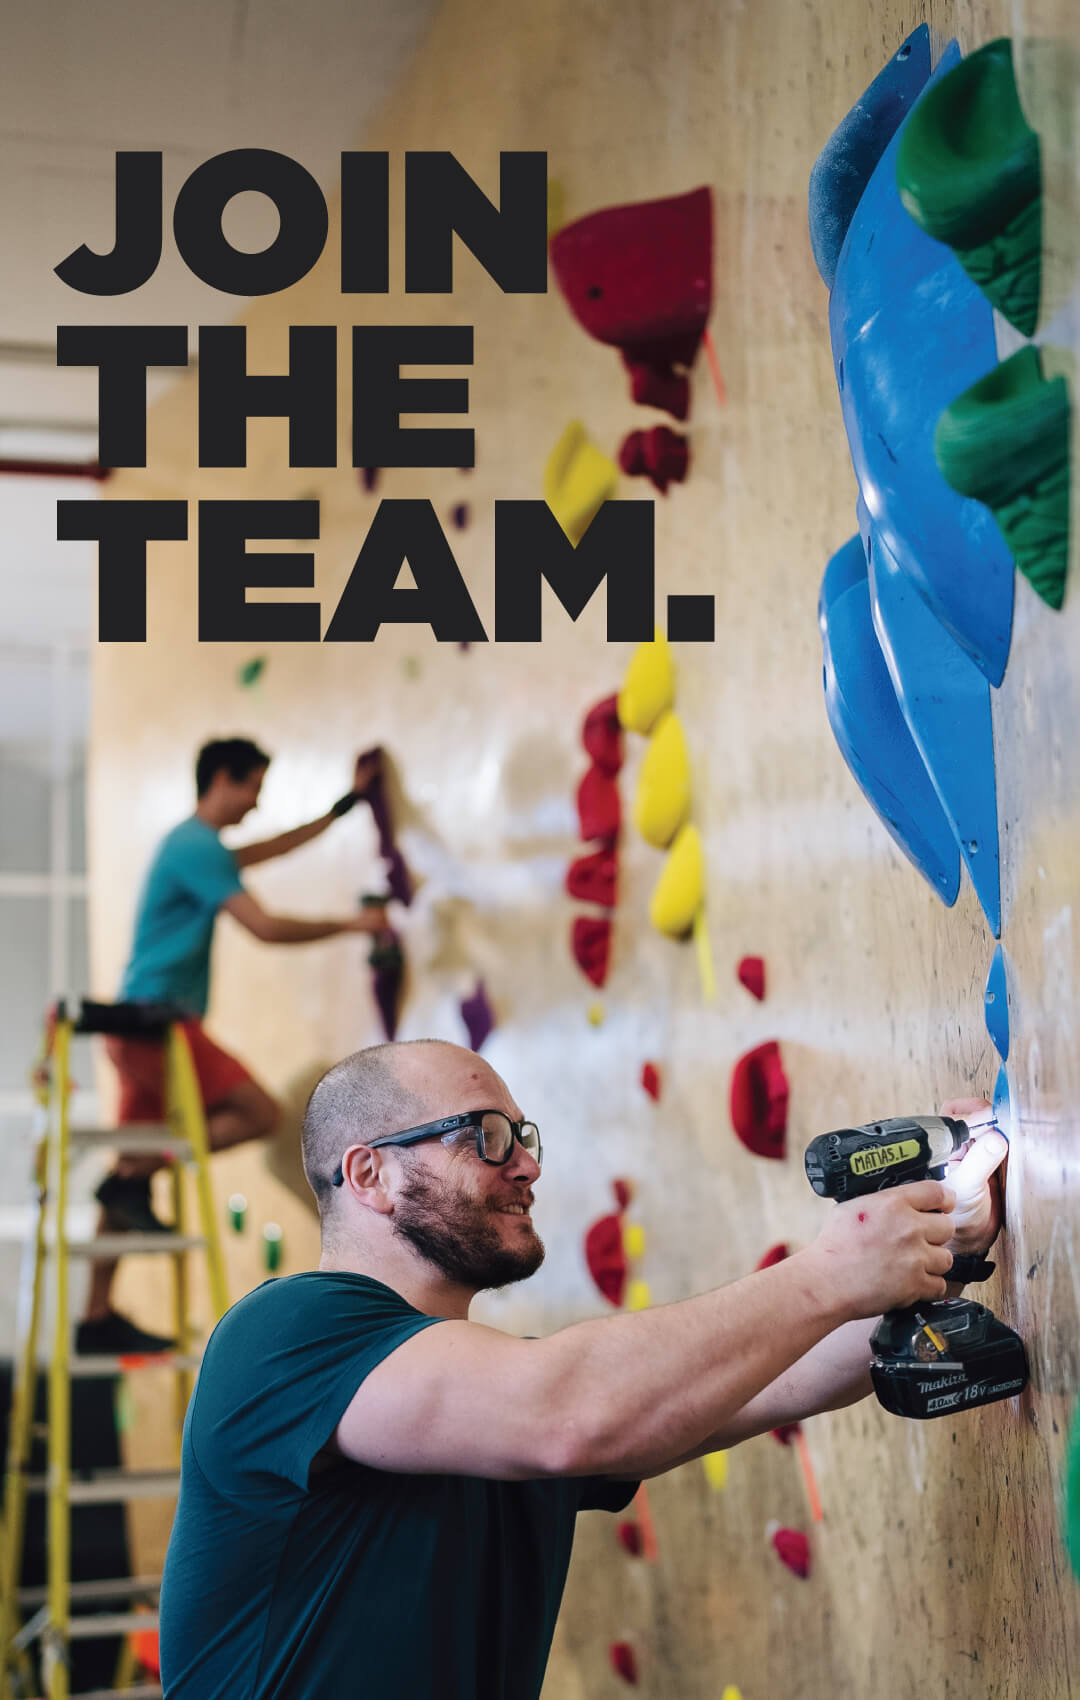 Join the team. - Man drilling fixture into indoor rock climbing wall